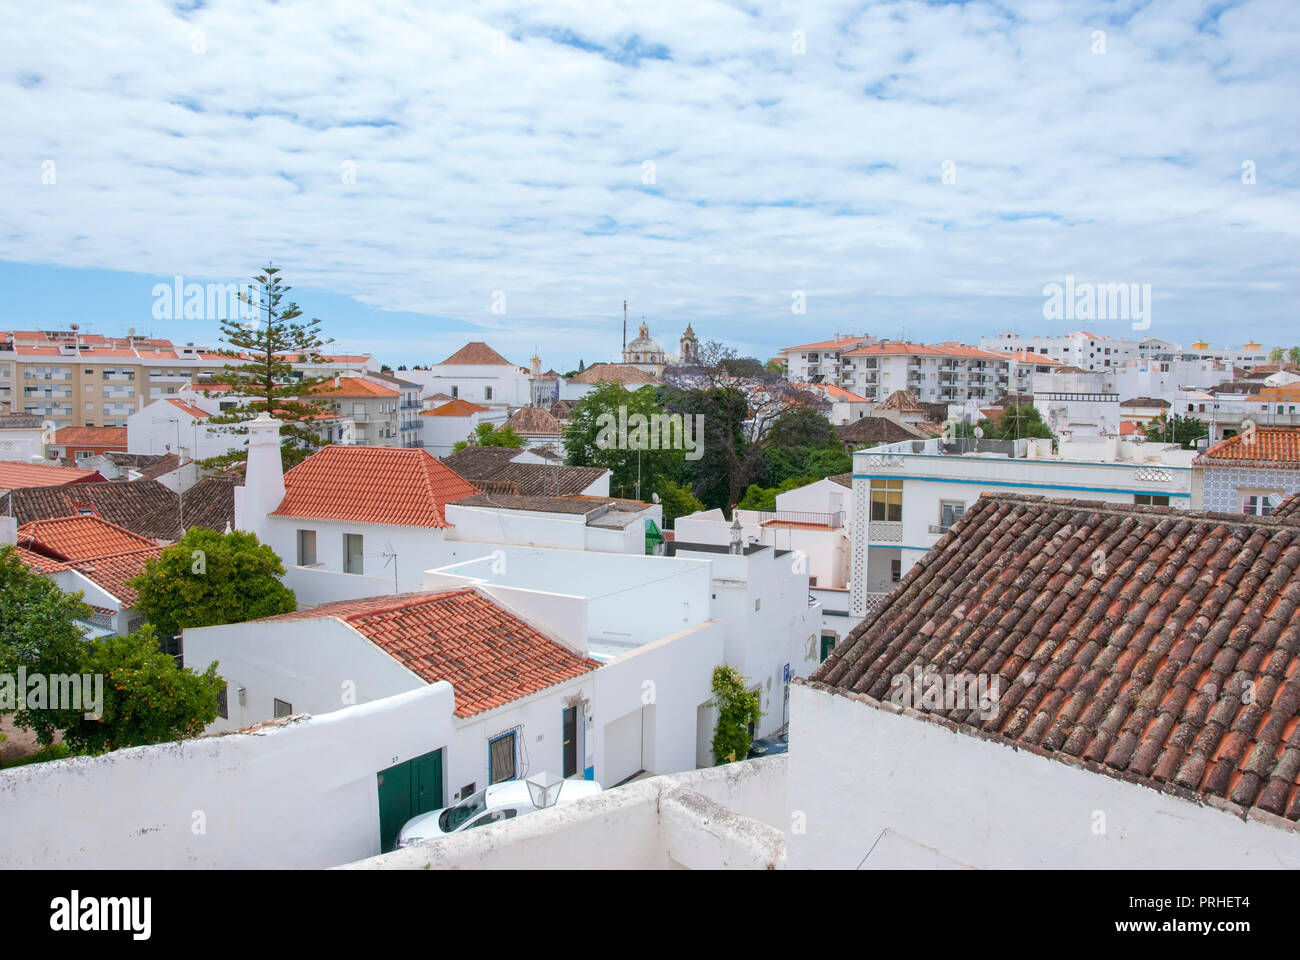 Tiled Rooftops of Tavira City The Algarve Portugal elevated cityscape view from 12th century tavira castle across the red reddish brown tiles of the r Stock Photo